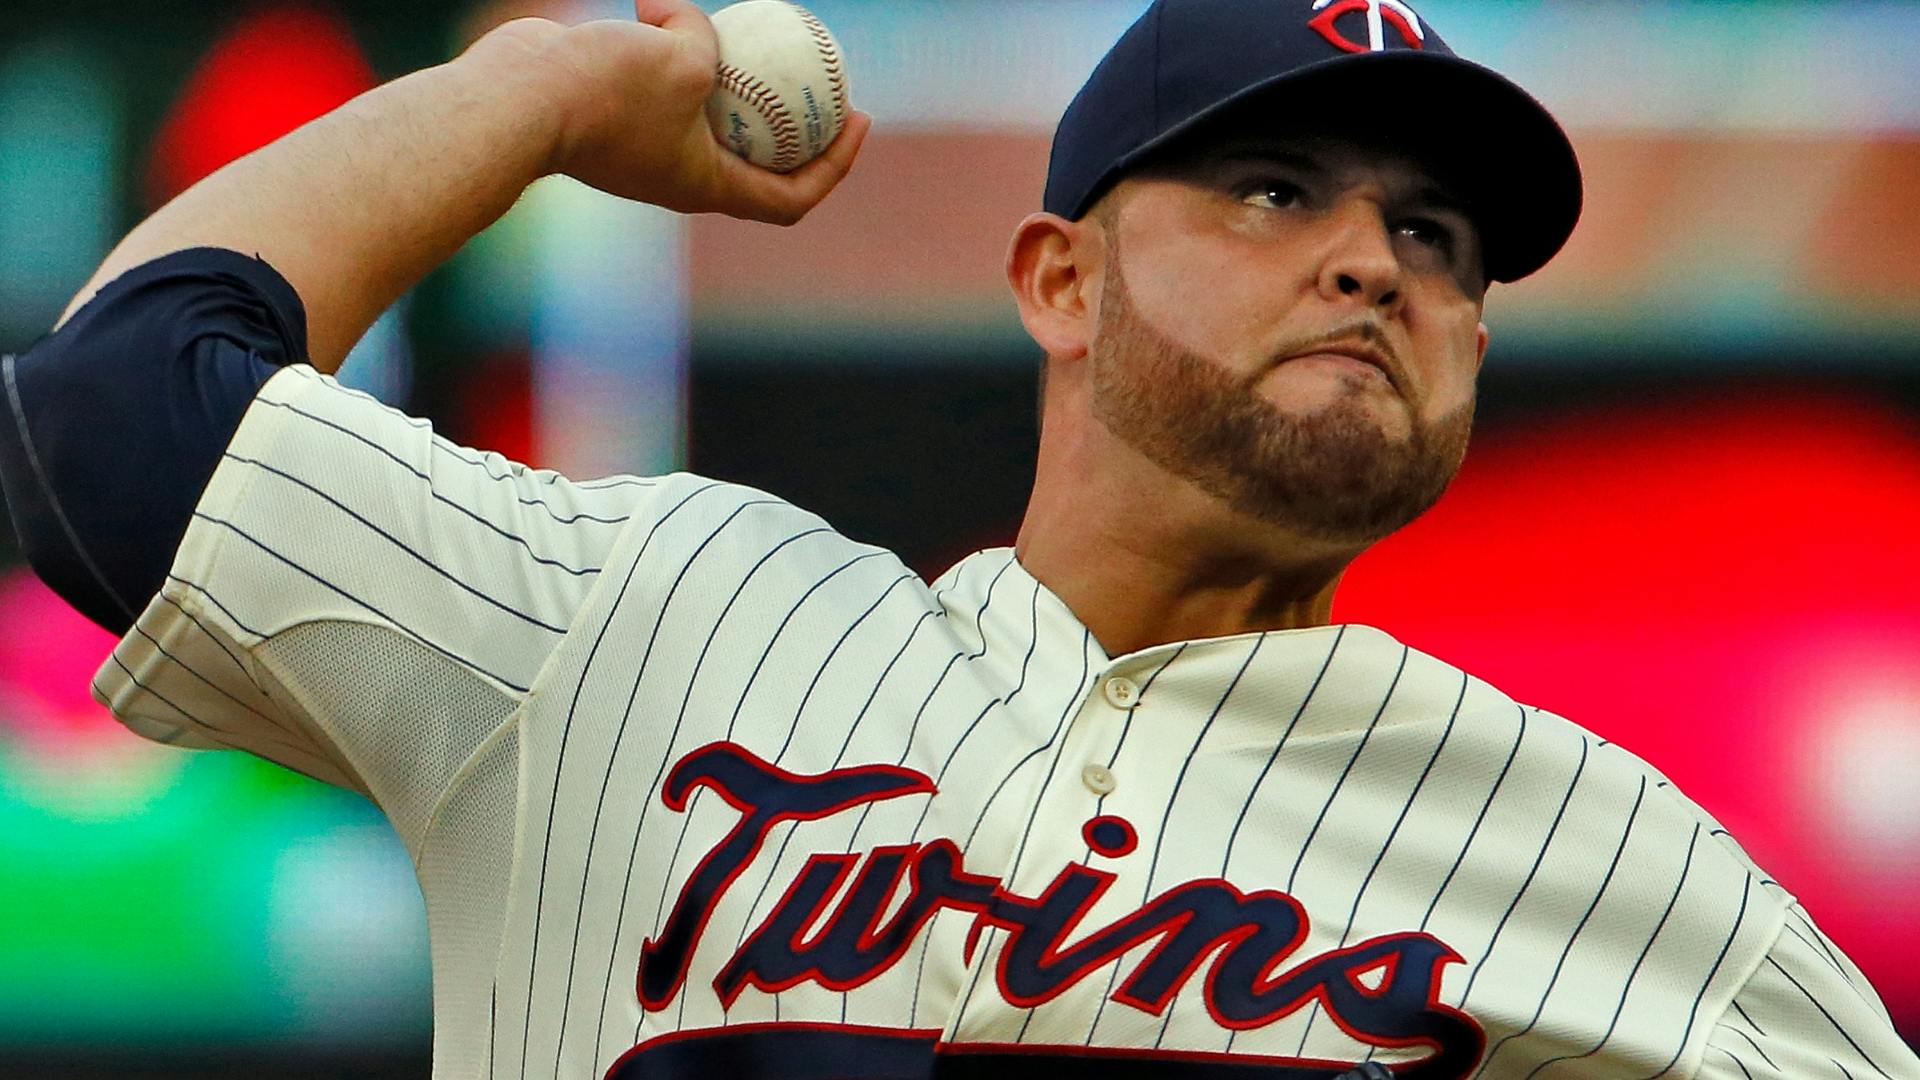 Twins pitcher Ricky Nolasco says his fastball command was excellent Wednesday, but Brewers made him pay for his rare mistakes.